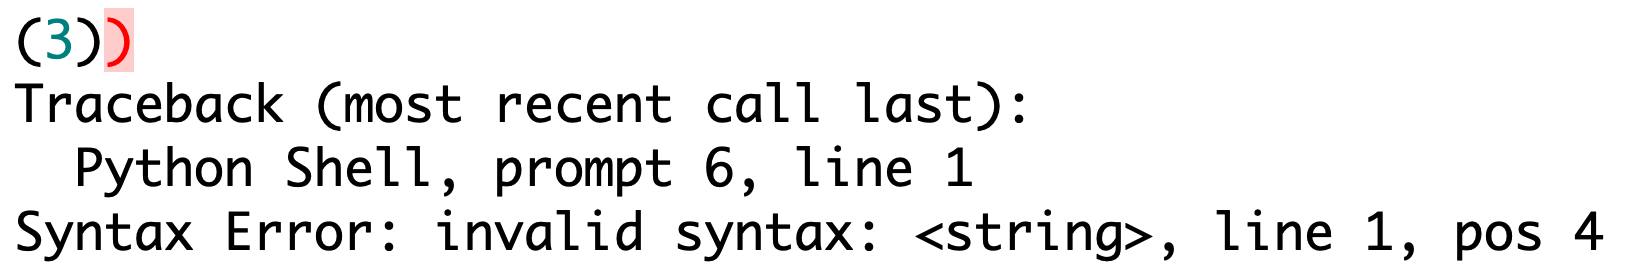 The image shows a syntax error message from Python code.